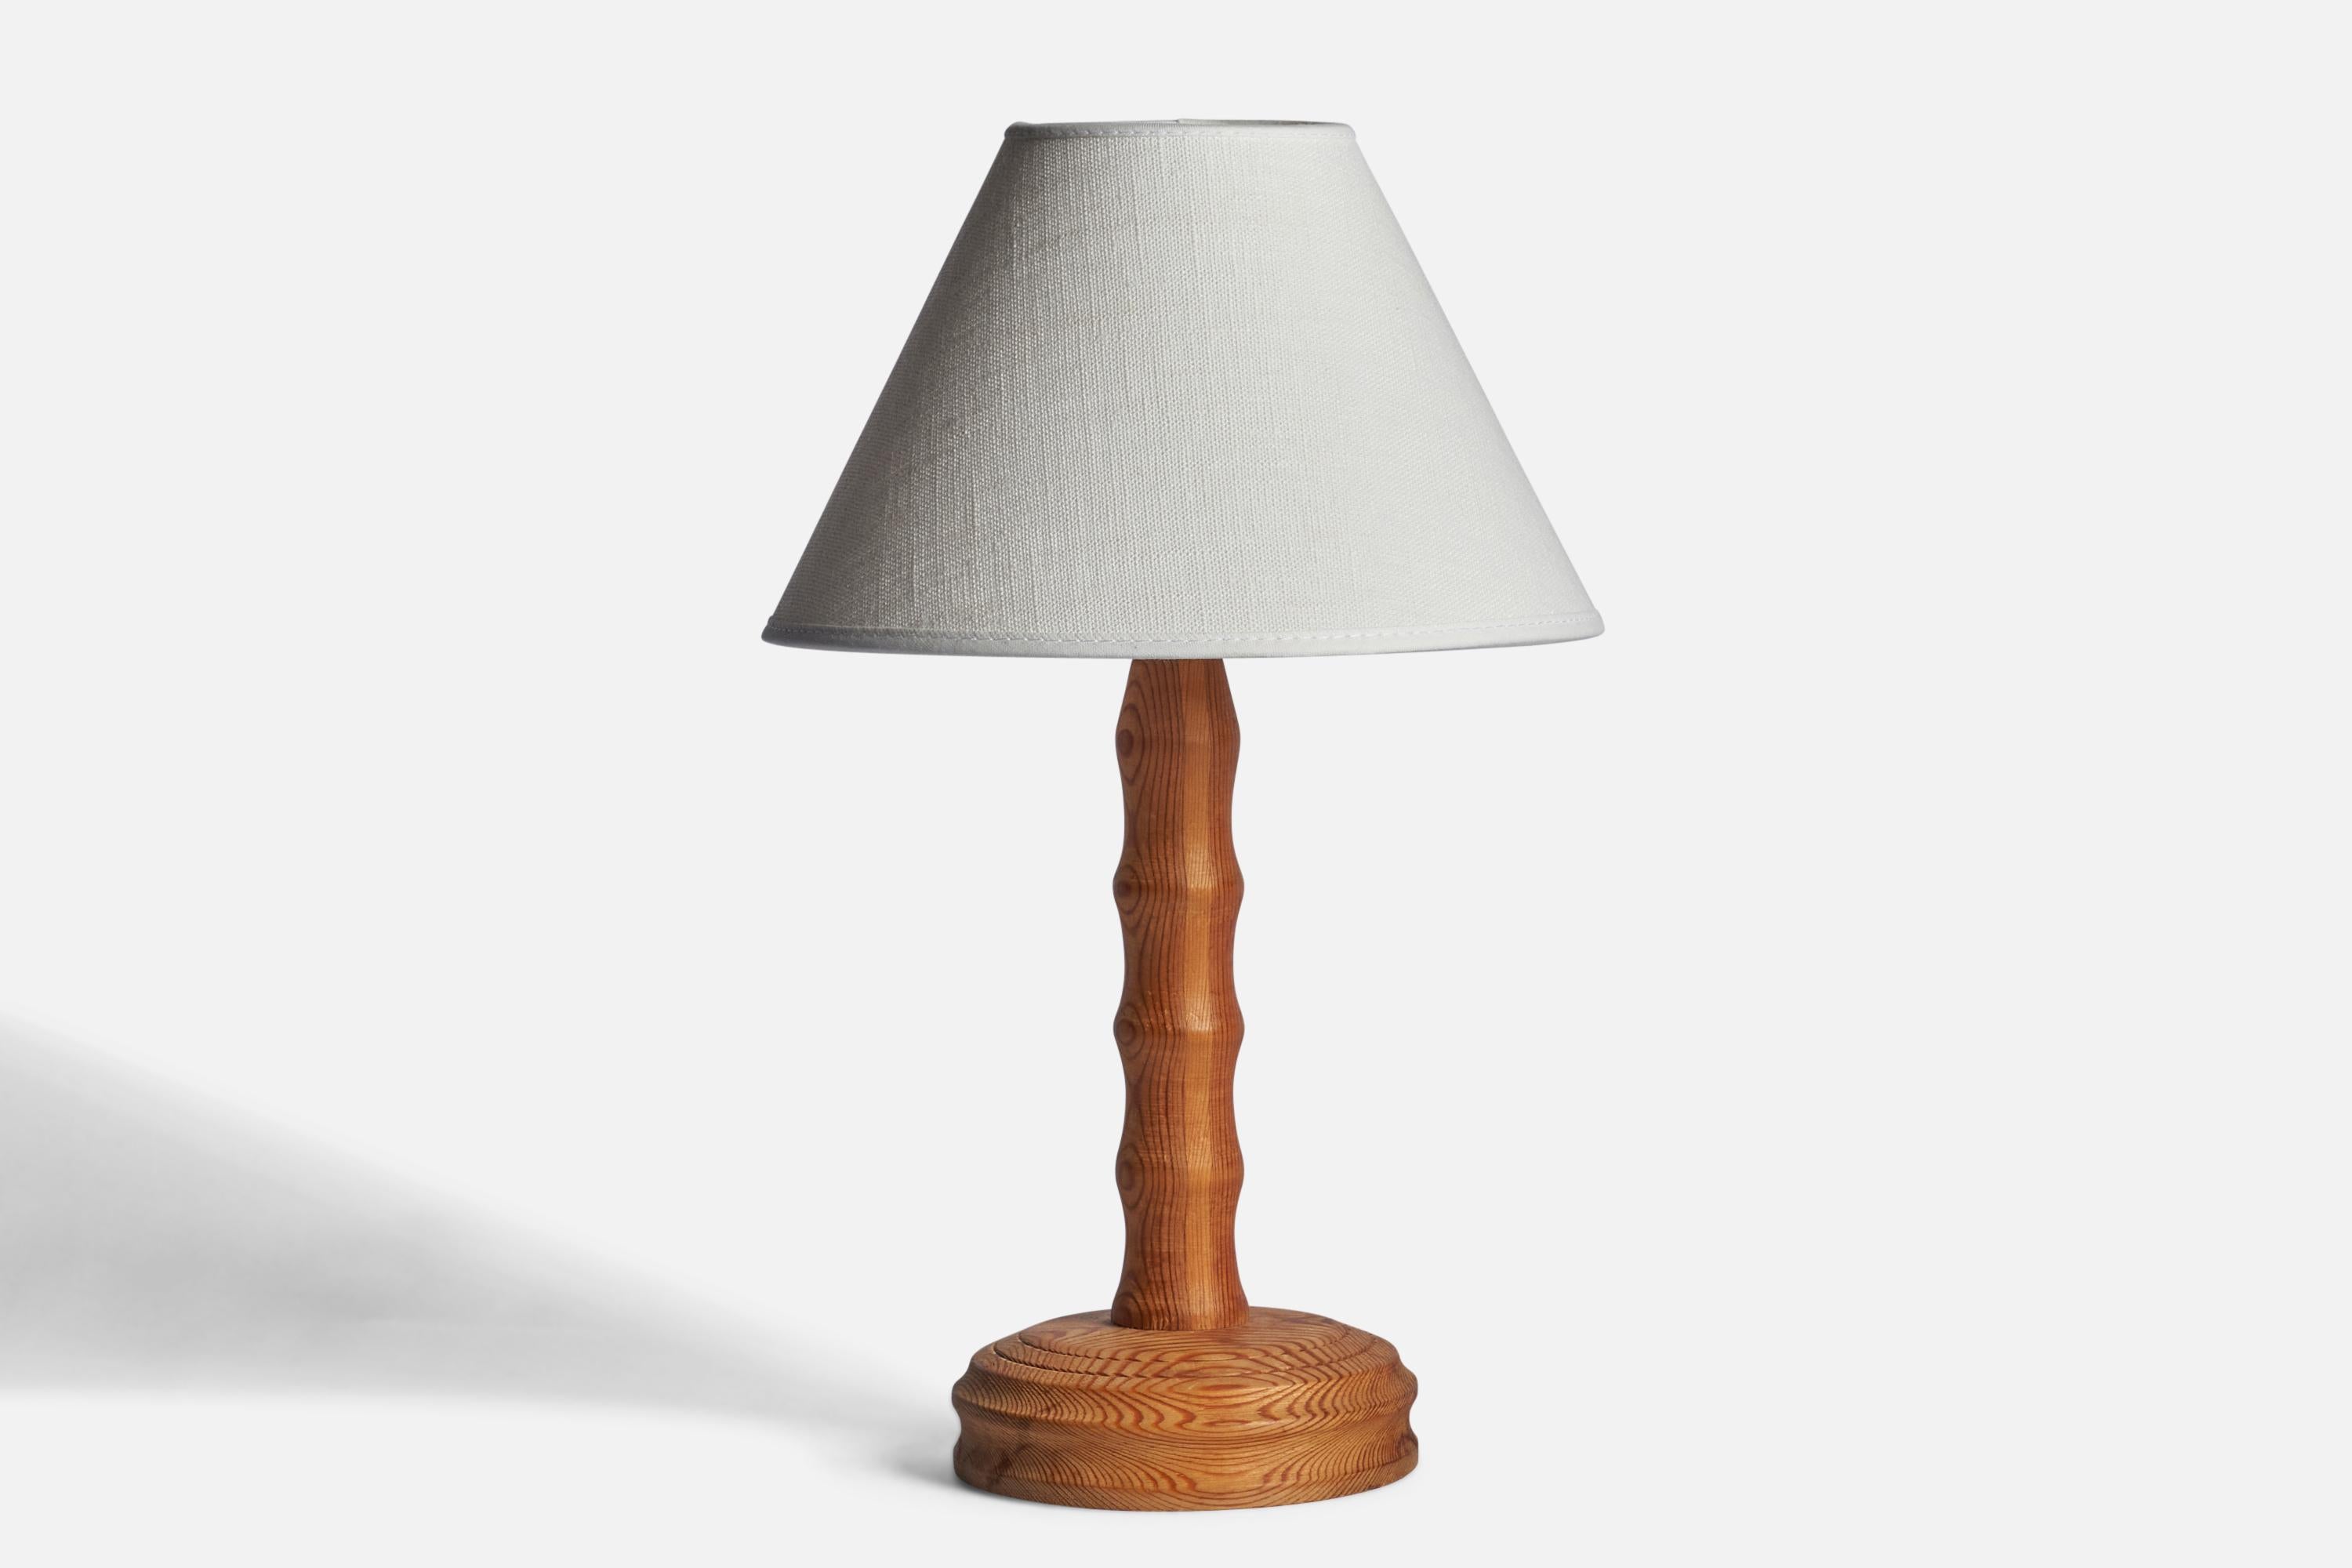 A pine table lamp designed and produced in Sweden, c. 1960s.

Dimensions of Lamp (inches): 10.15” H x 4.5” Diameter
Dimensions of Shade (inches): 3” Top Diameter x 8” Bottom Diameter x 5” H 
Dimensions of Lamp with Shade (inches): 13” H x 8”